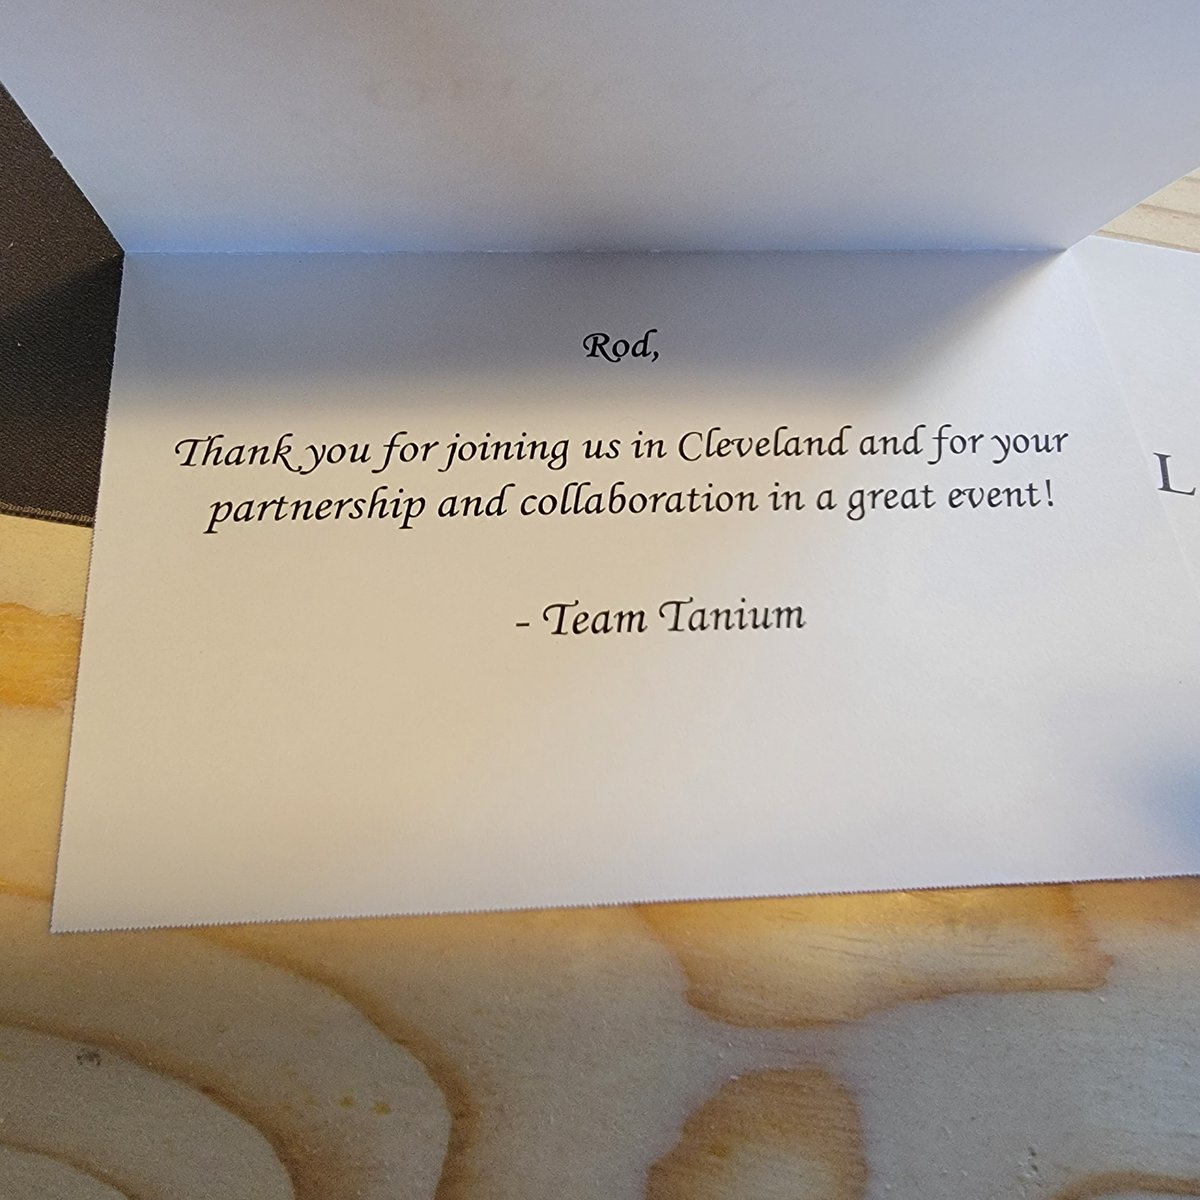 Super thoughtful! Thanks @Tanium crew! Looking forward to Milwaukee.